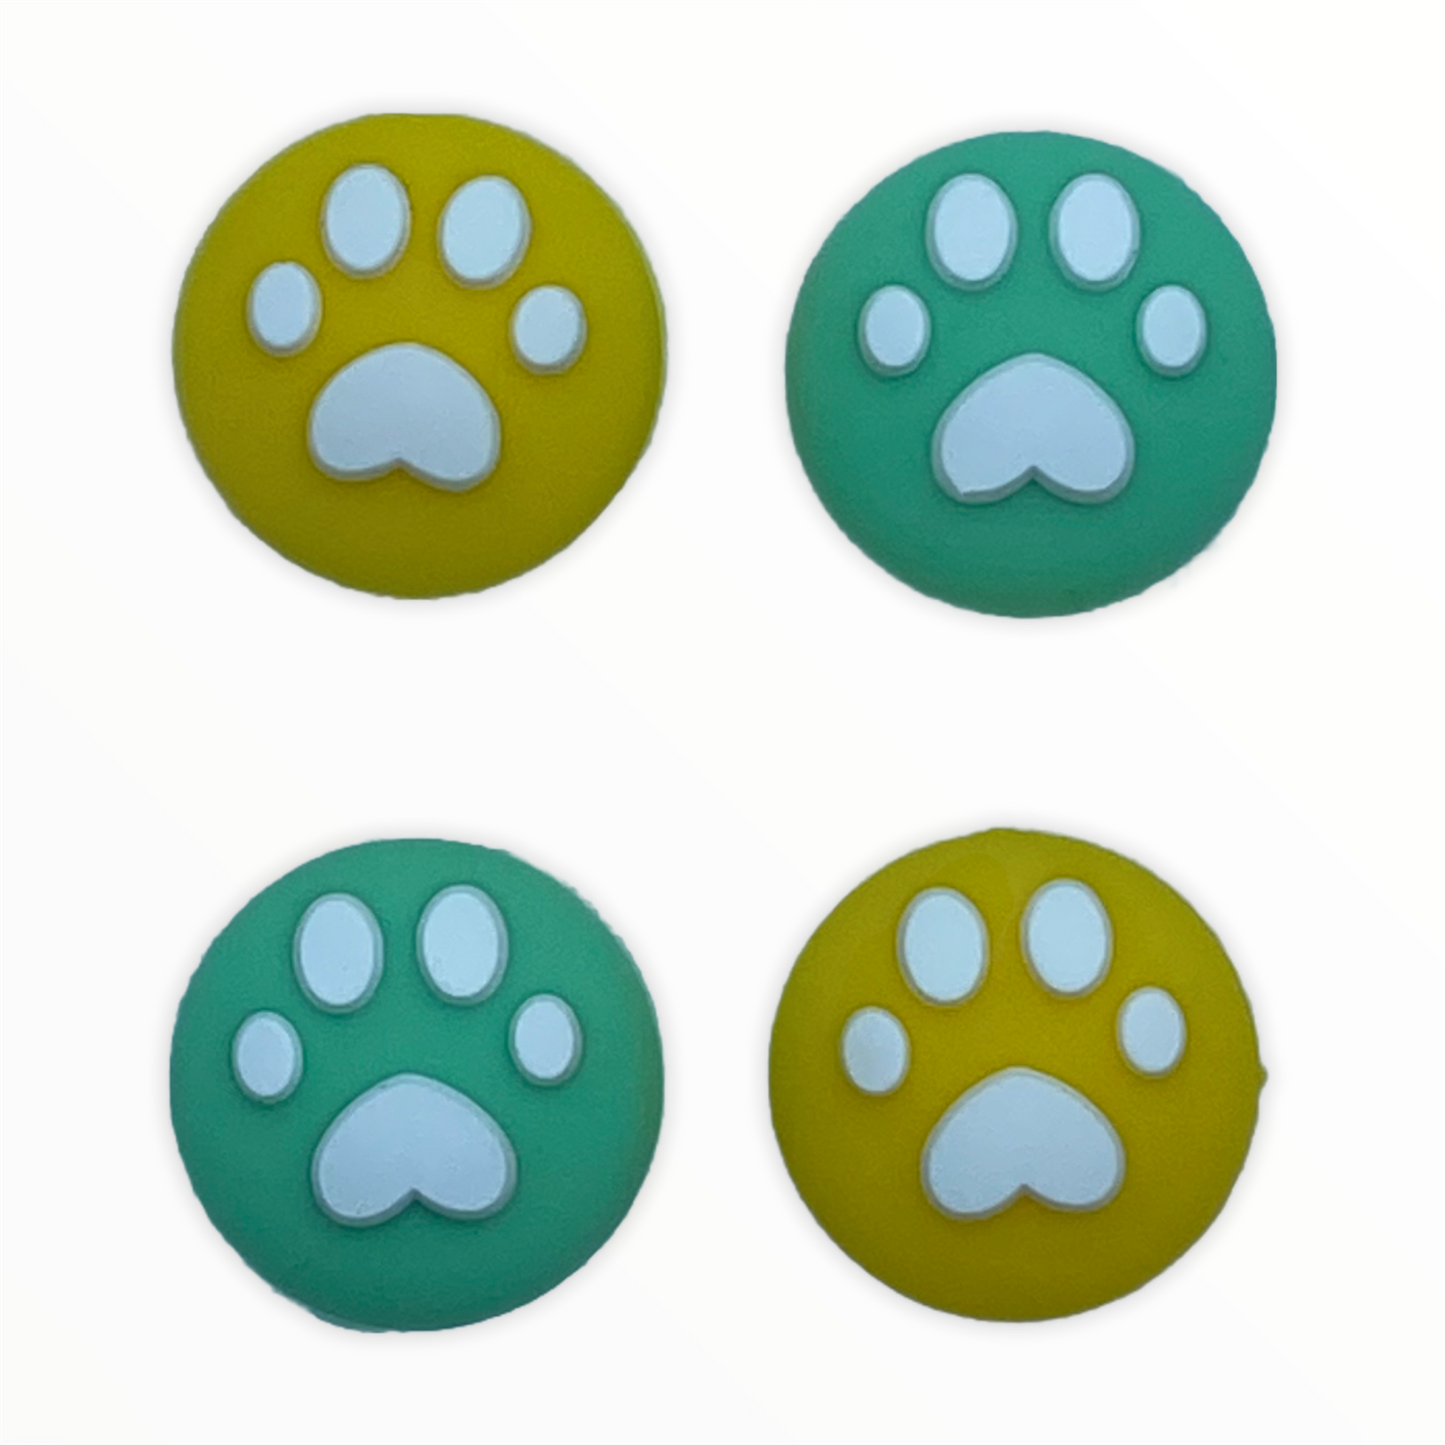 JenDore Green & Yellow 4Pcs Paws Silicone Thumb Grip Caps for Nintendo Switch